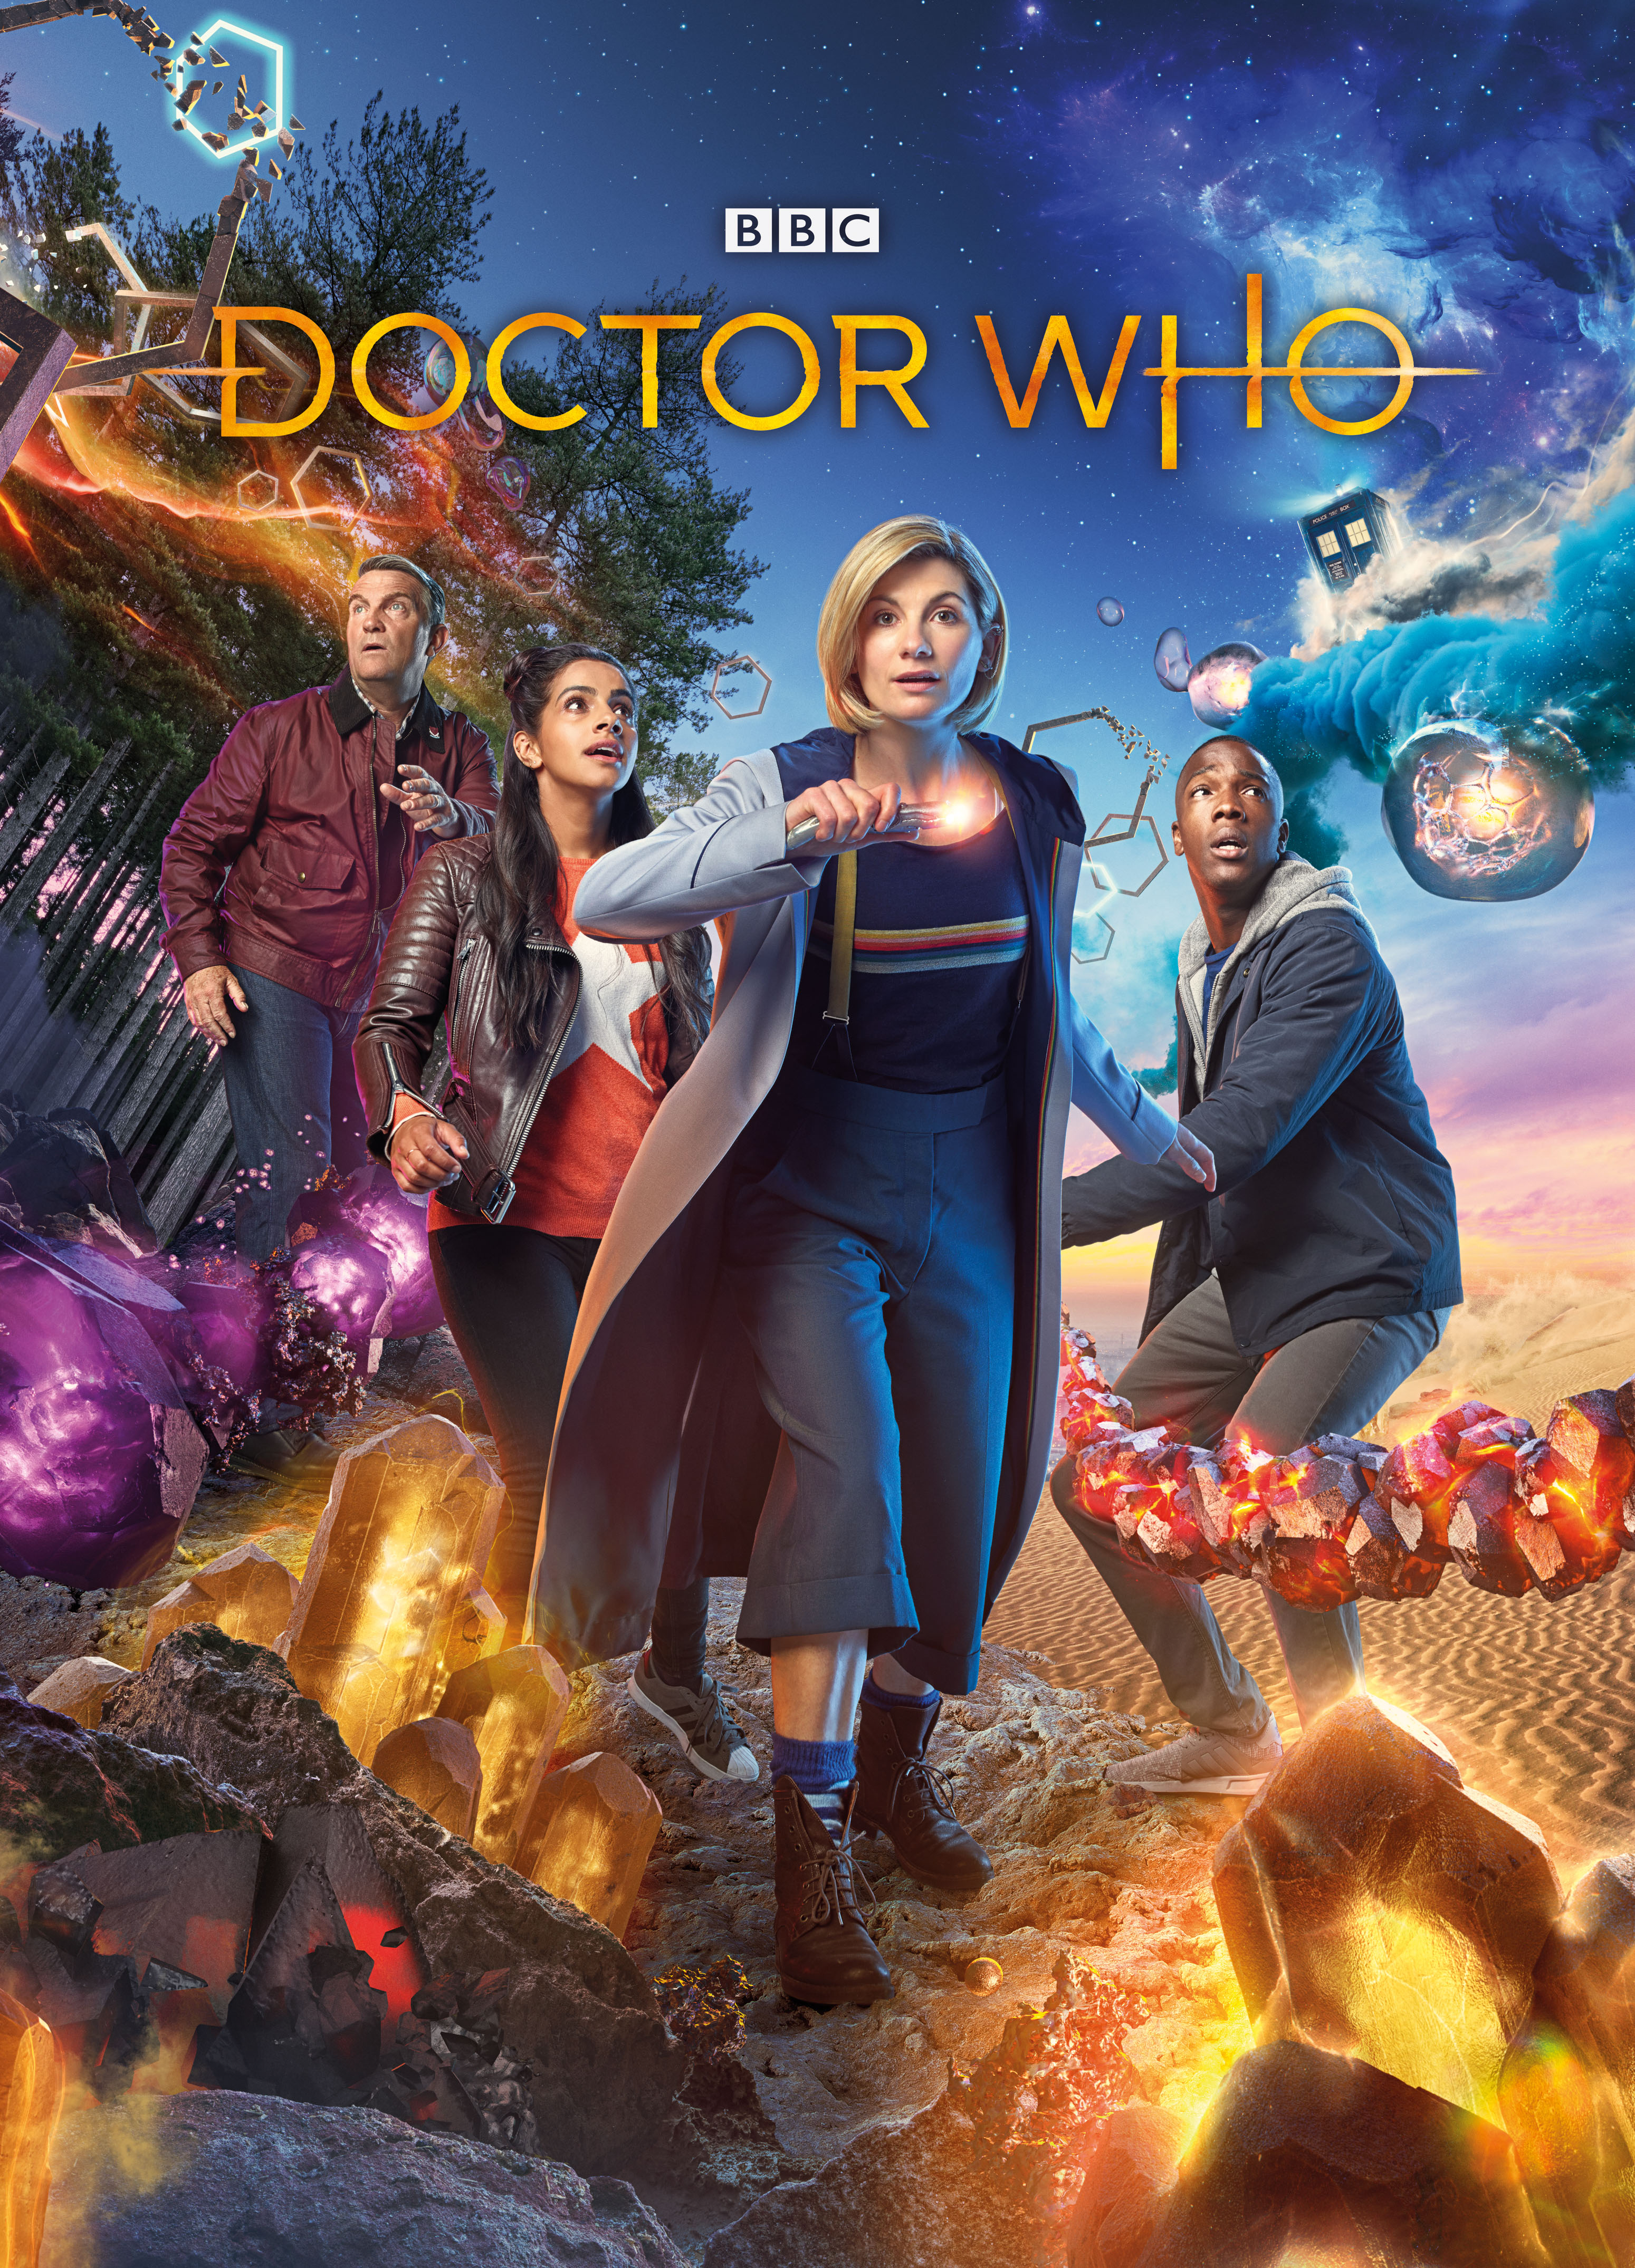 Doctor Who series 11 Sunday October 7th 6.45 PM BBC 1 Image